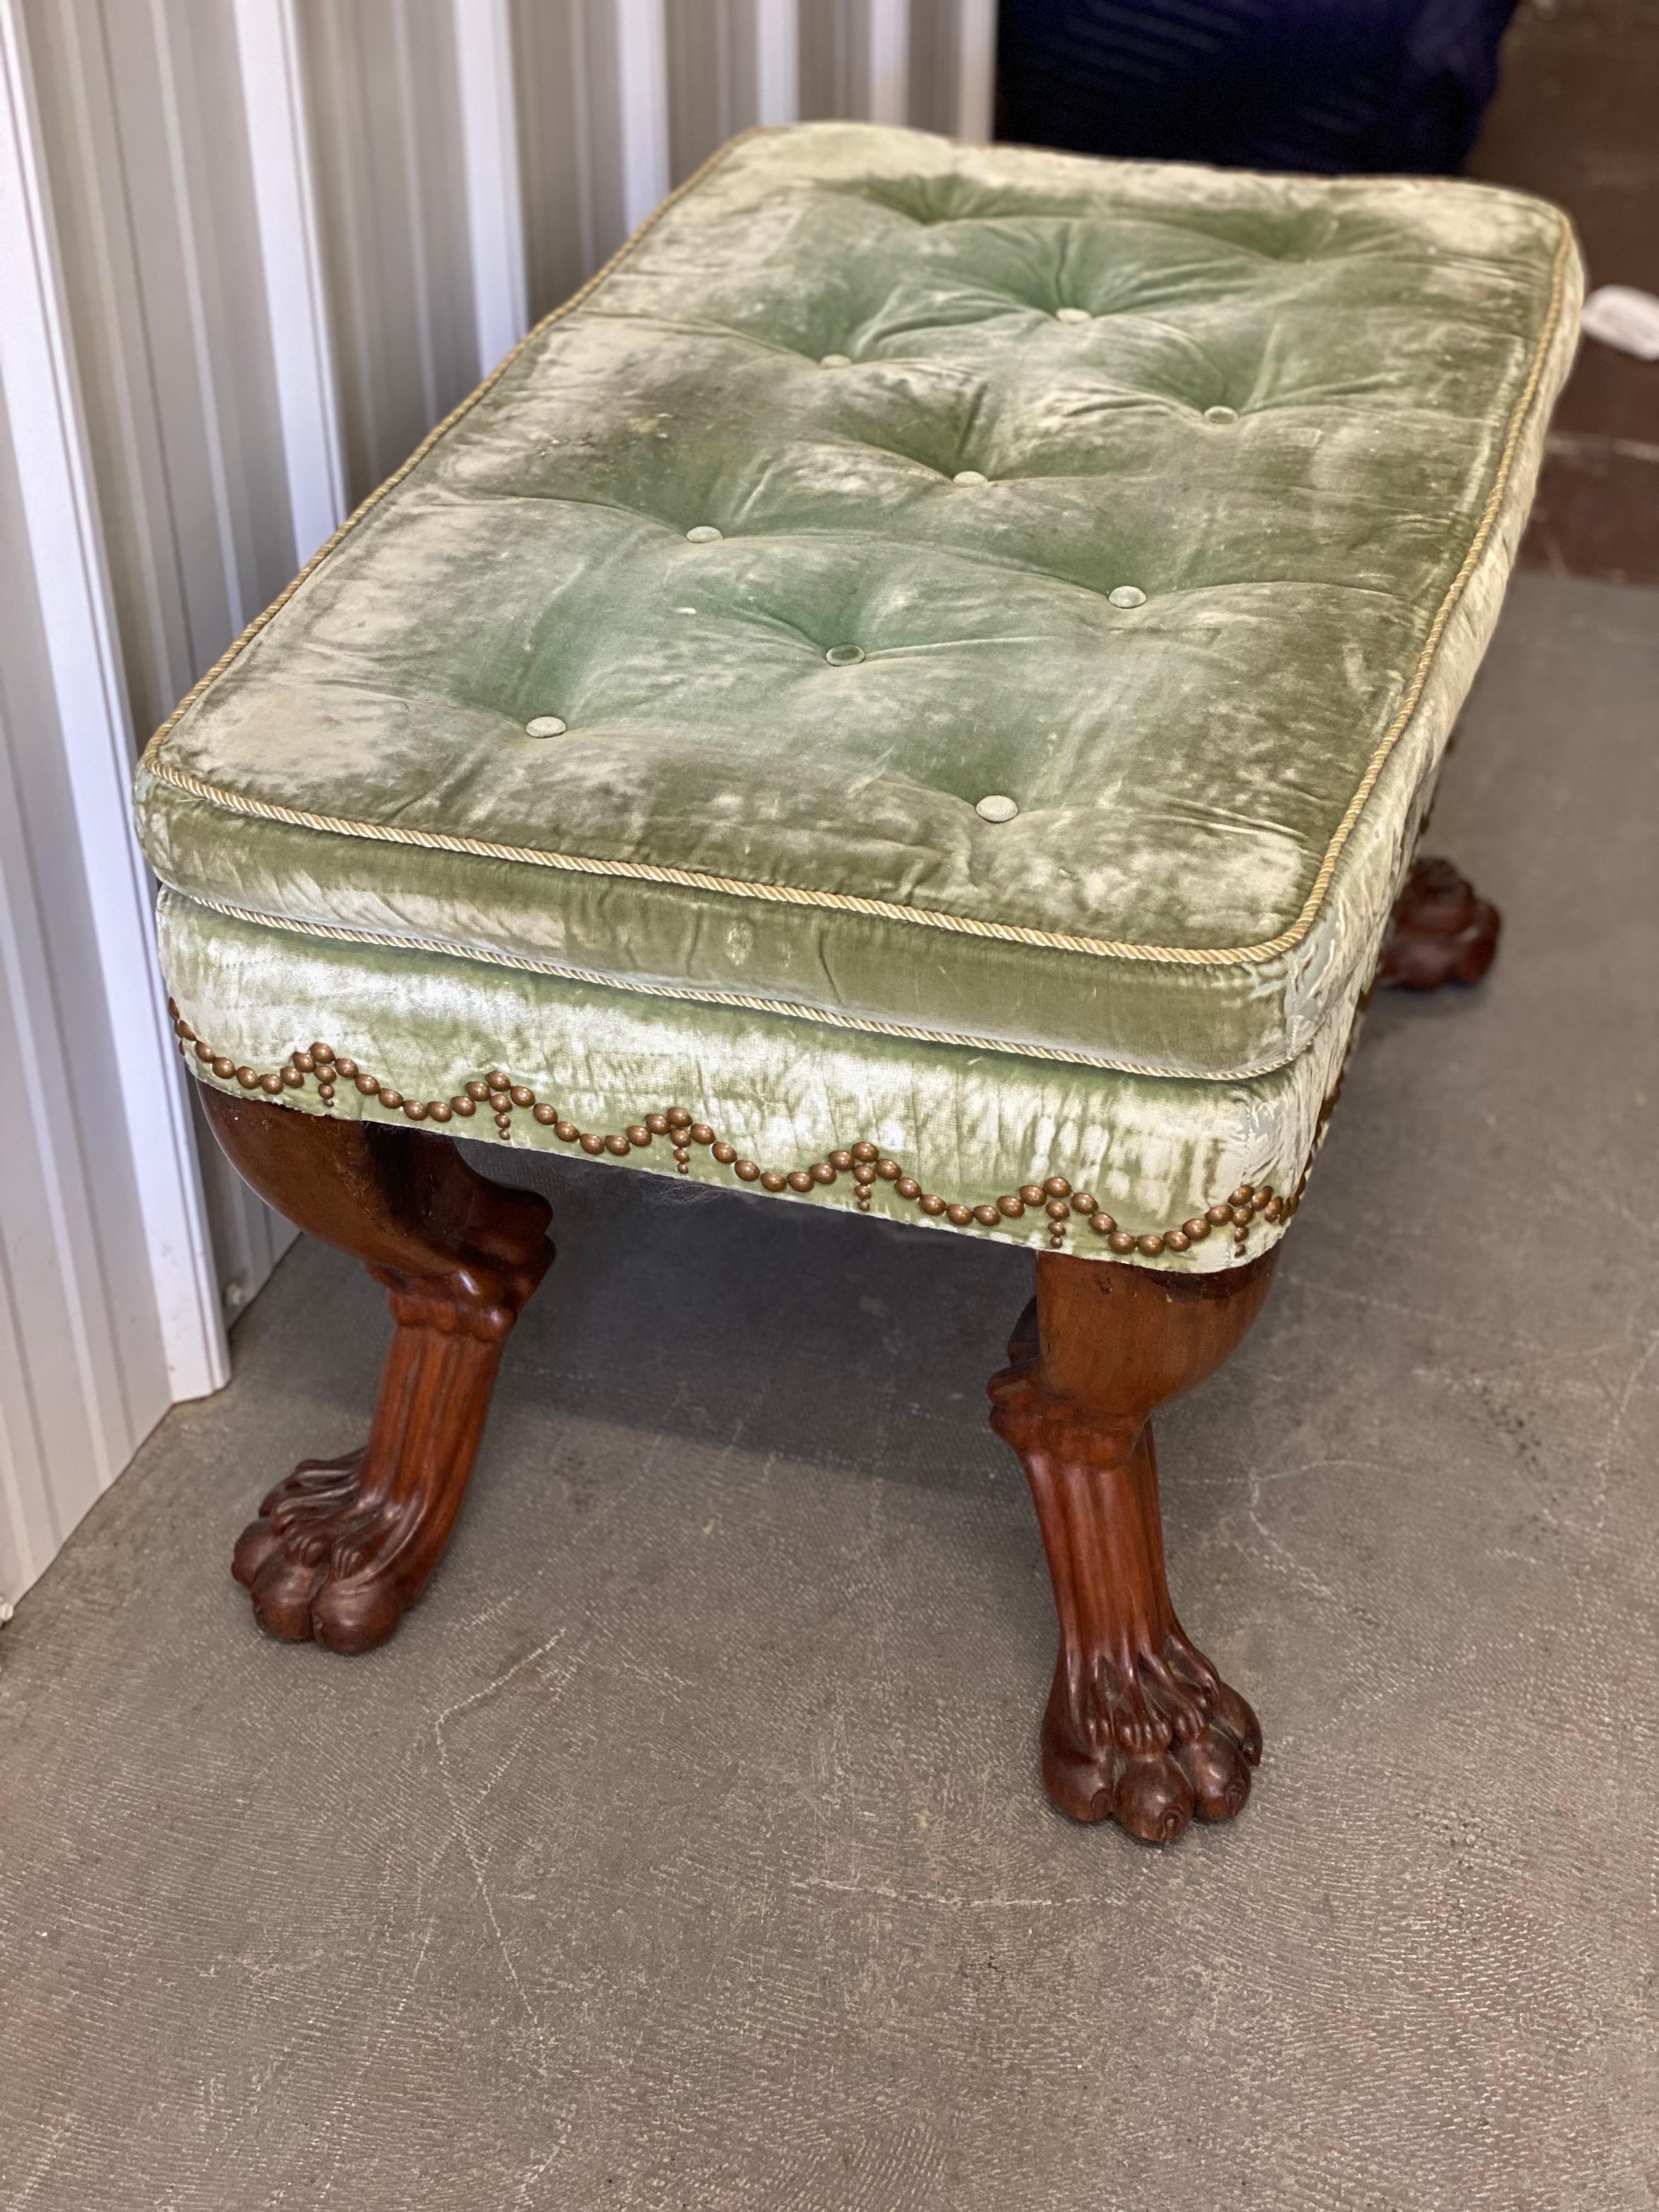 18th Century English Mahogany Clawfoot Stool in Velvet with Nailheads For Sale 4